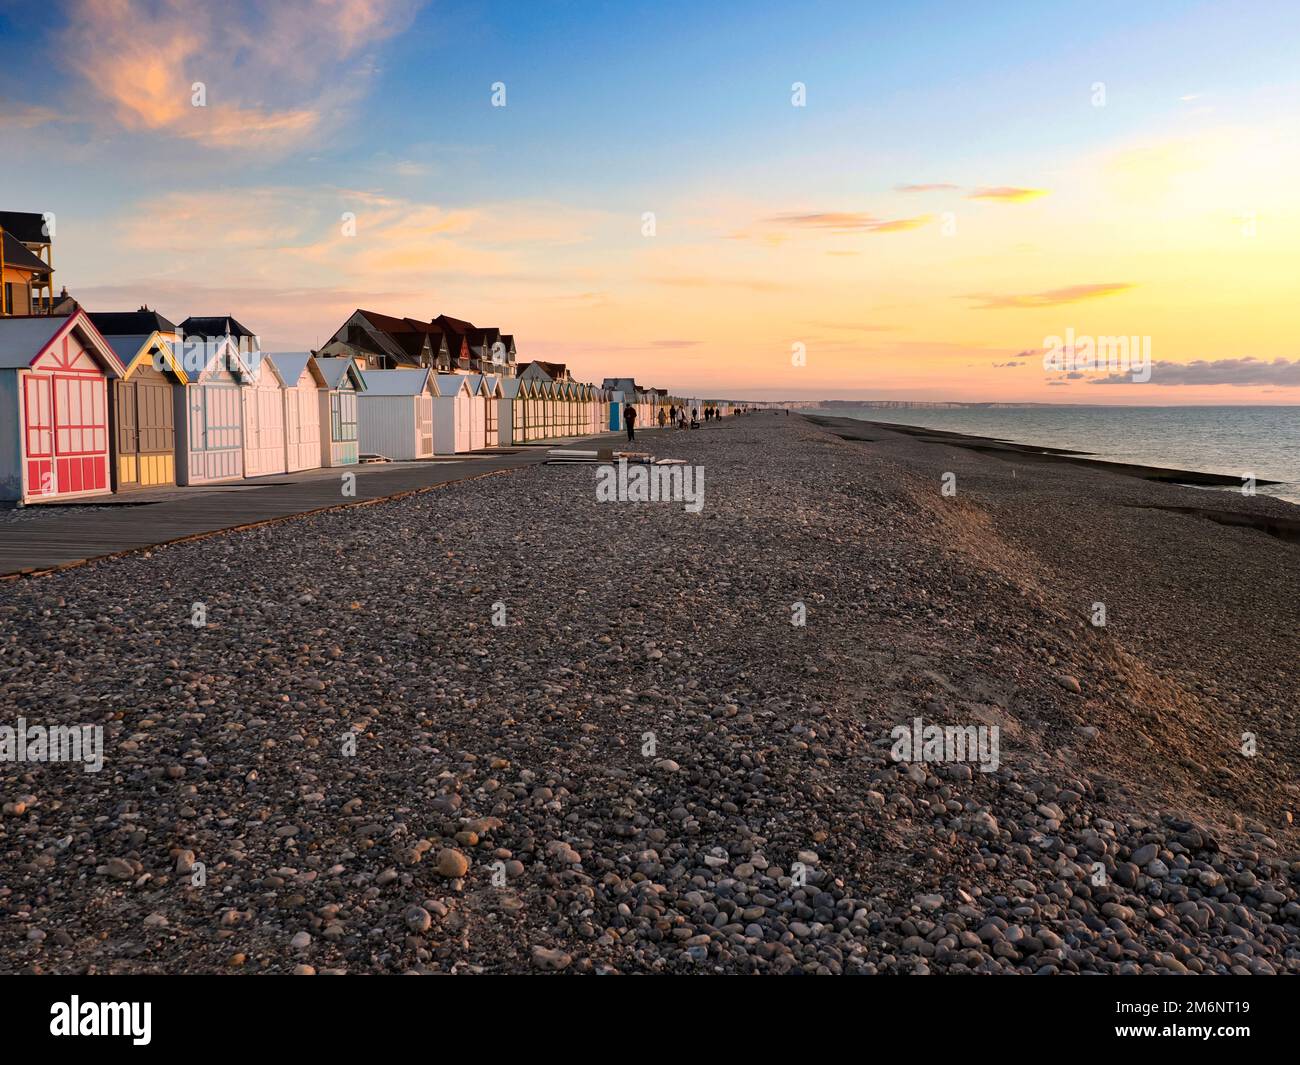 Beach cabins and pebble beach in the evening at sunset at Cayeux sur Mer, a resort town in the Somme department in Hauts-de-France in northern France. Stock Photo